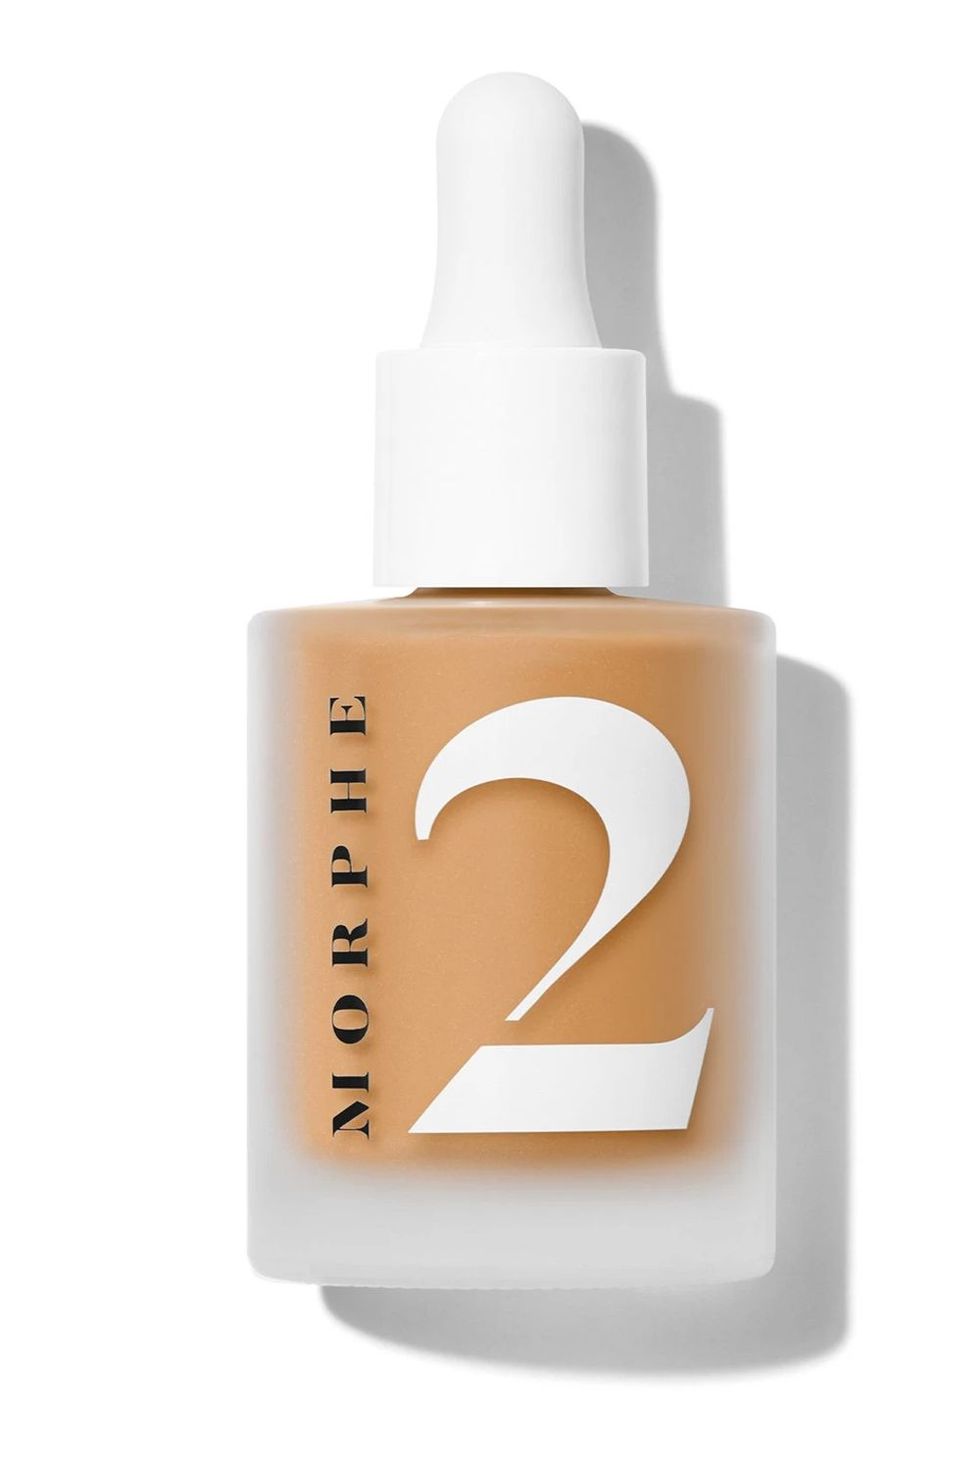 5 skin tints to use during this time (since foundation is out the